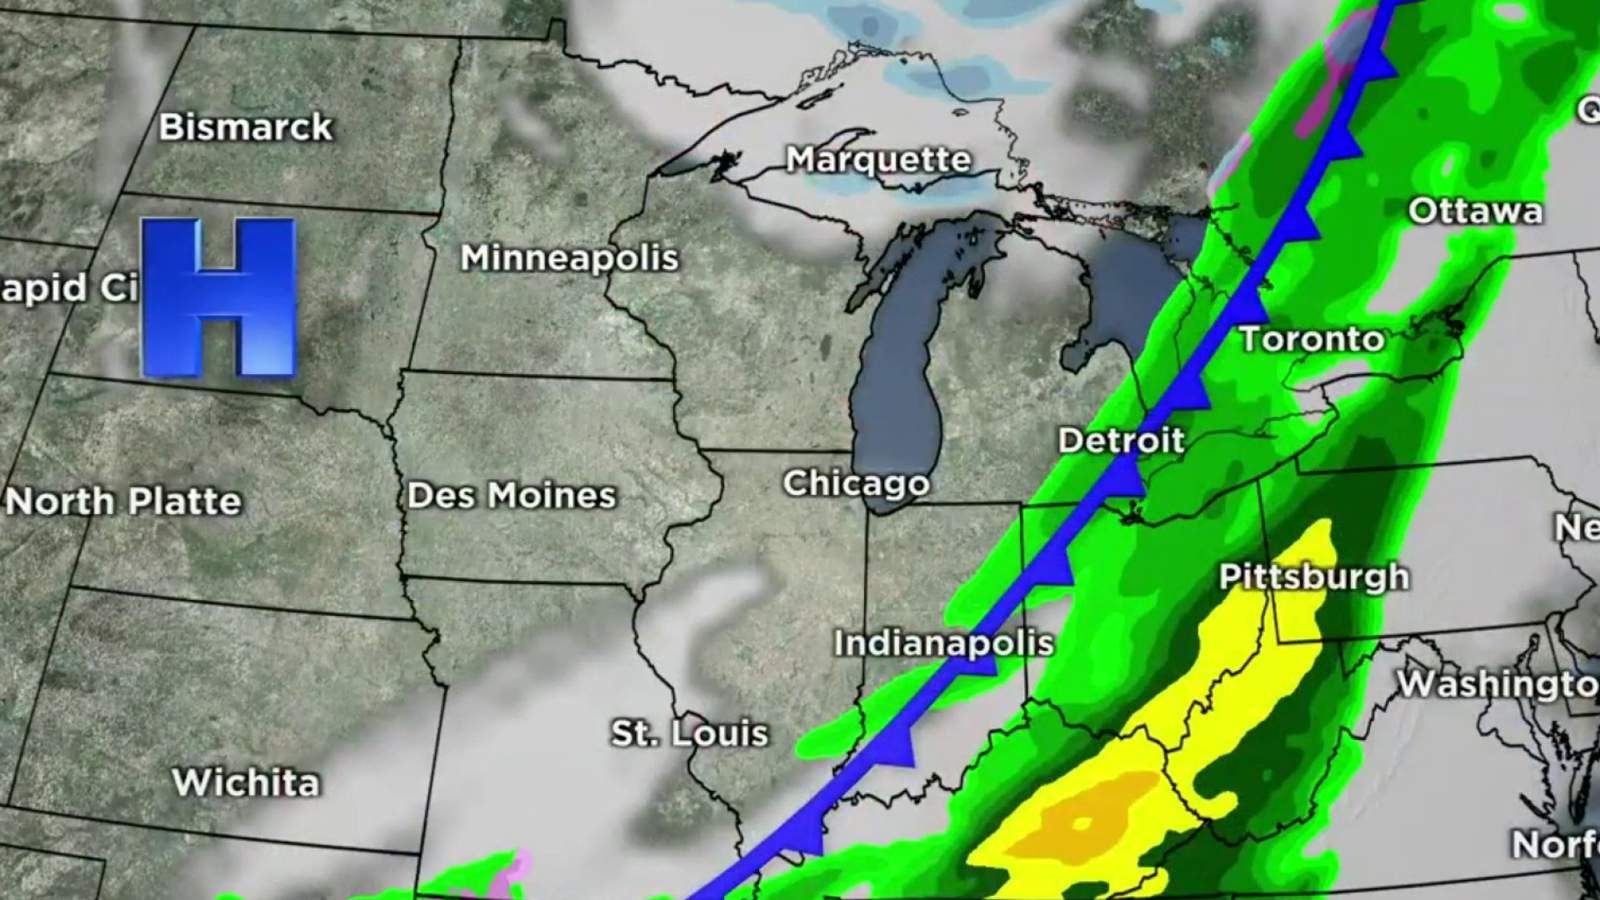 Metro Detroit weather: Miserable Opening Day forecast, but better weekend